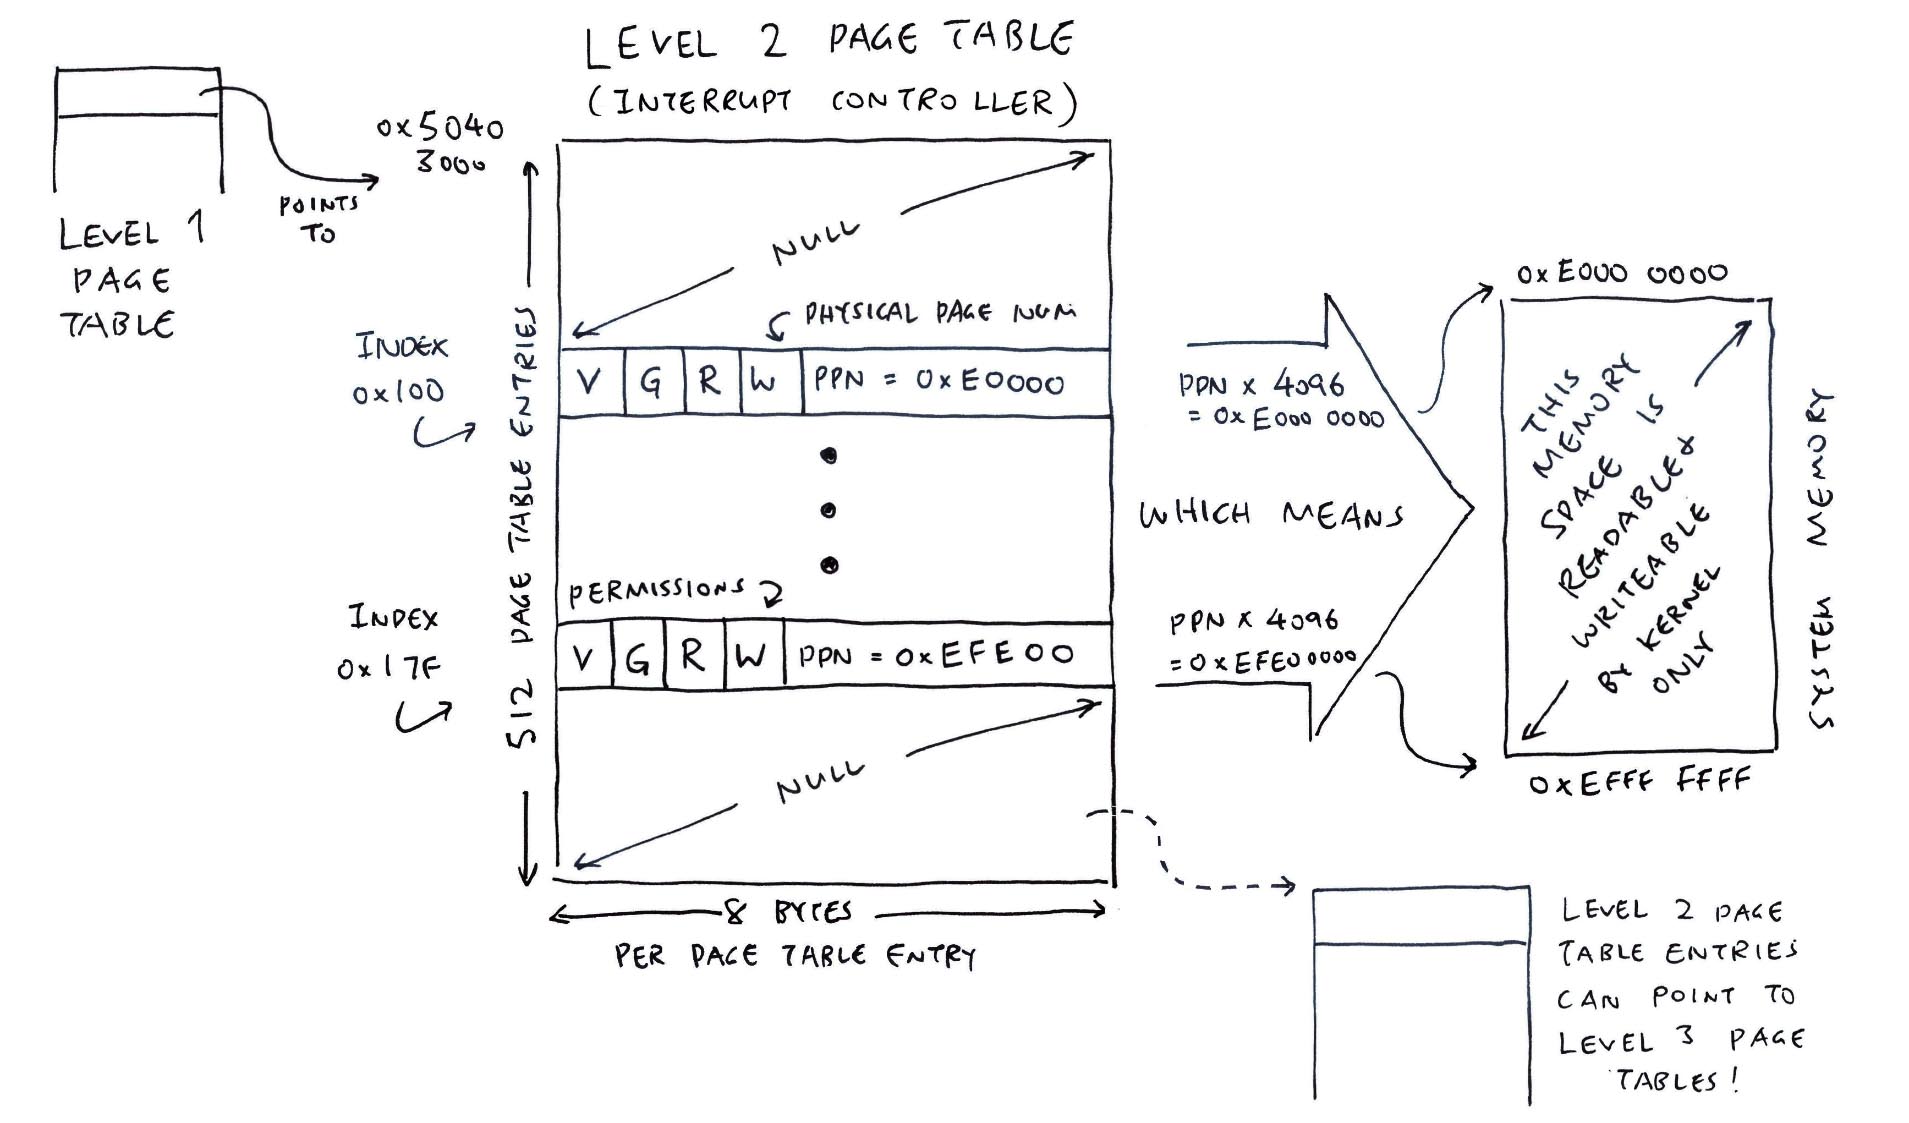 Level 2 Page Table for Interrupt Controller